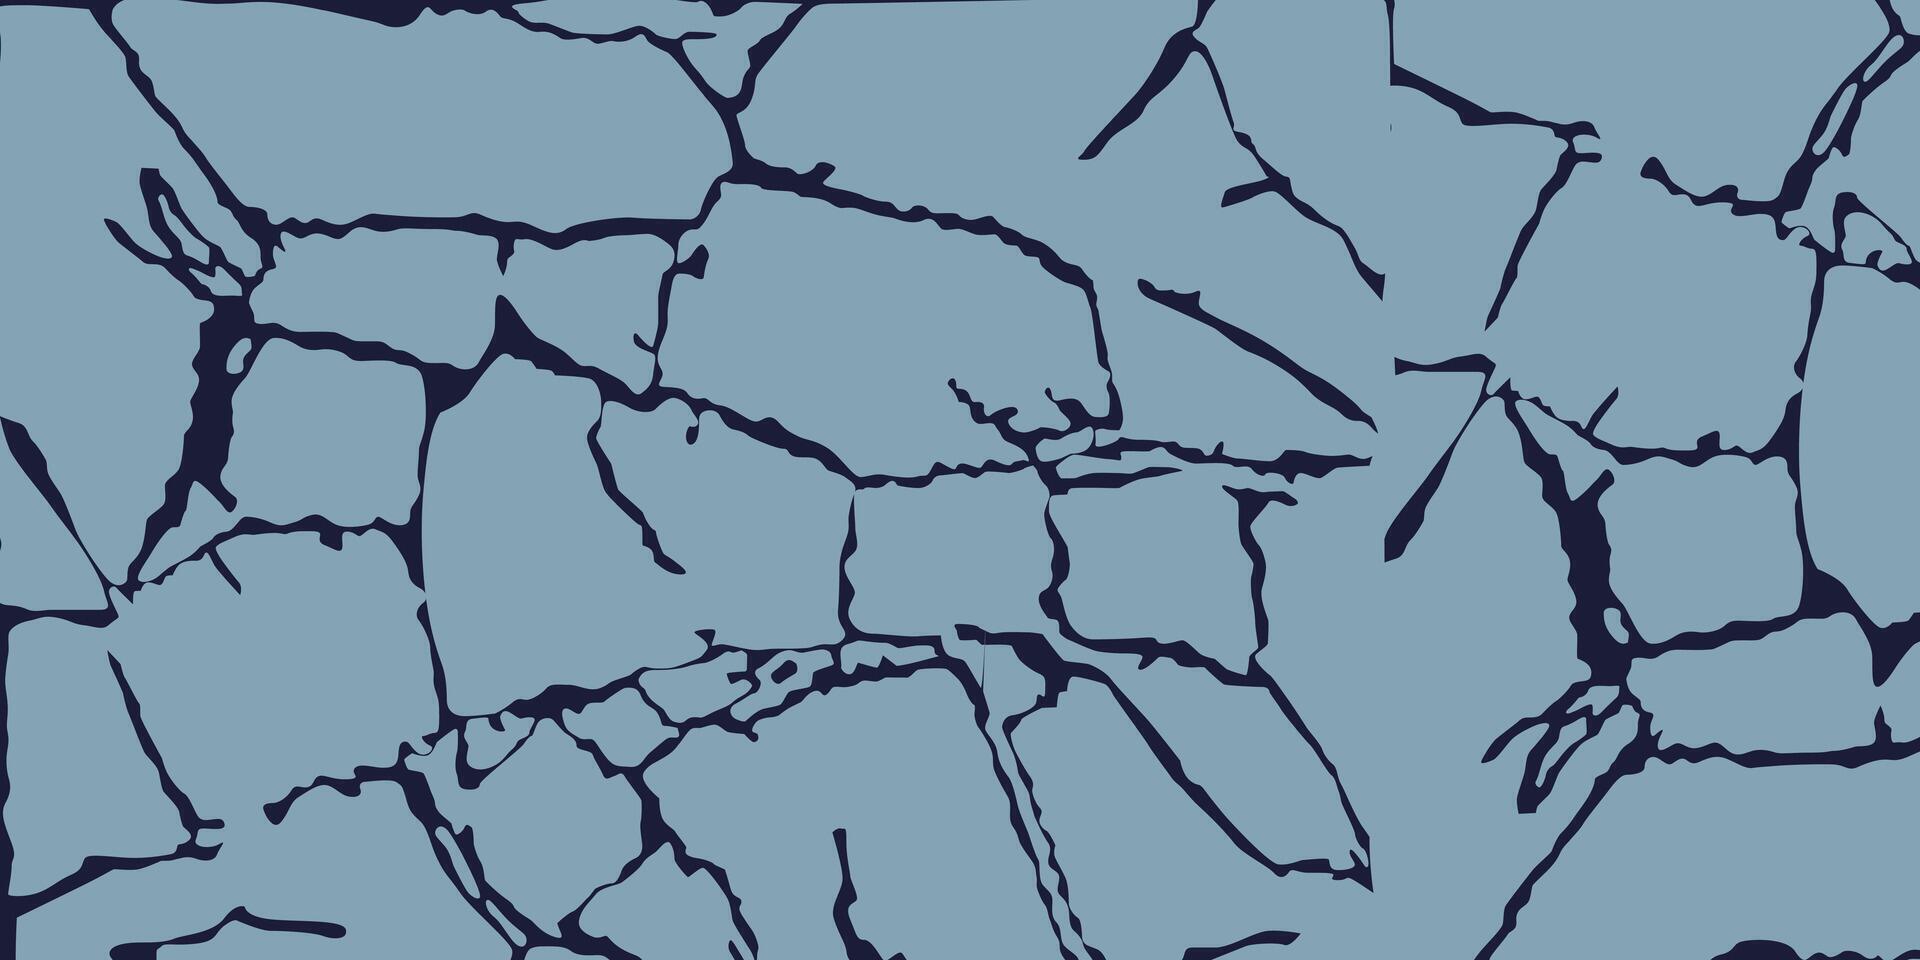 Tile cracked wall vector for background design.